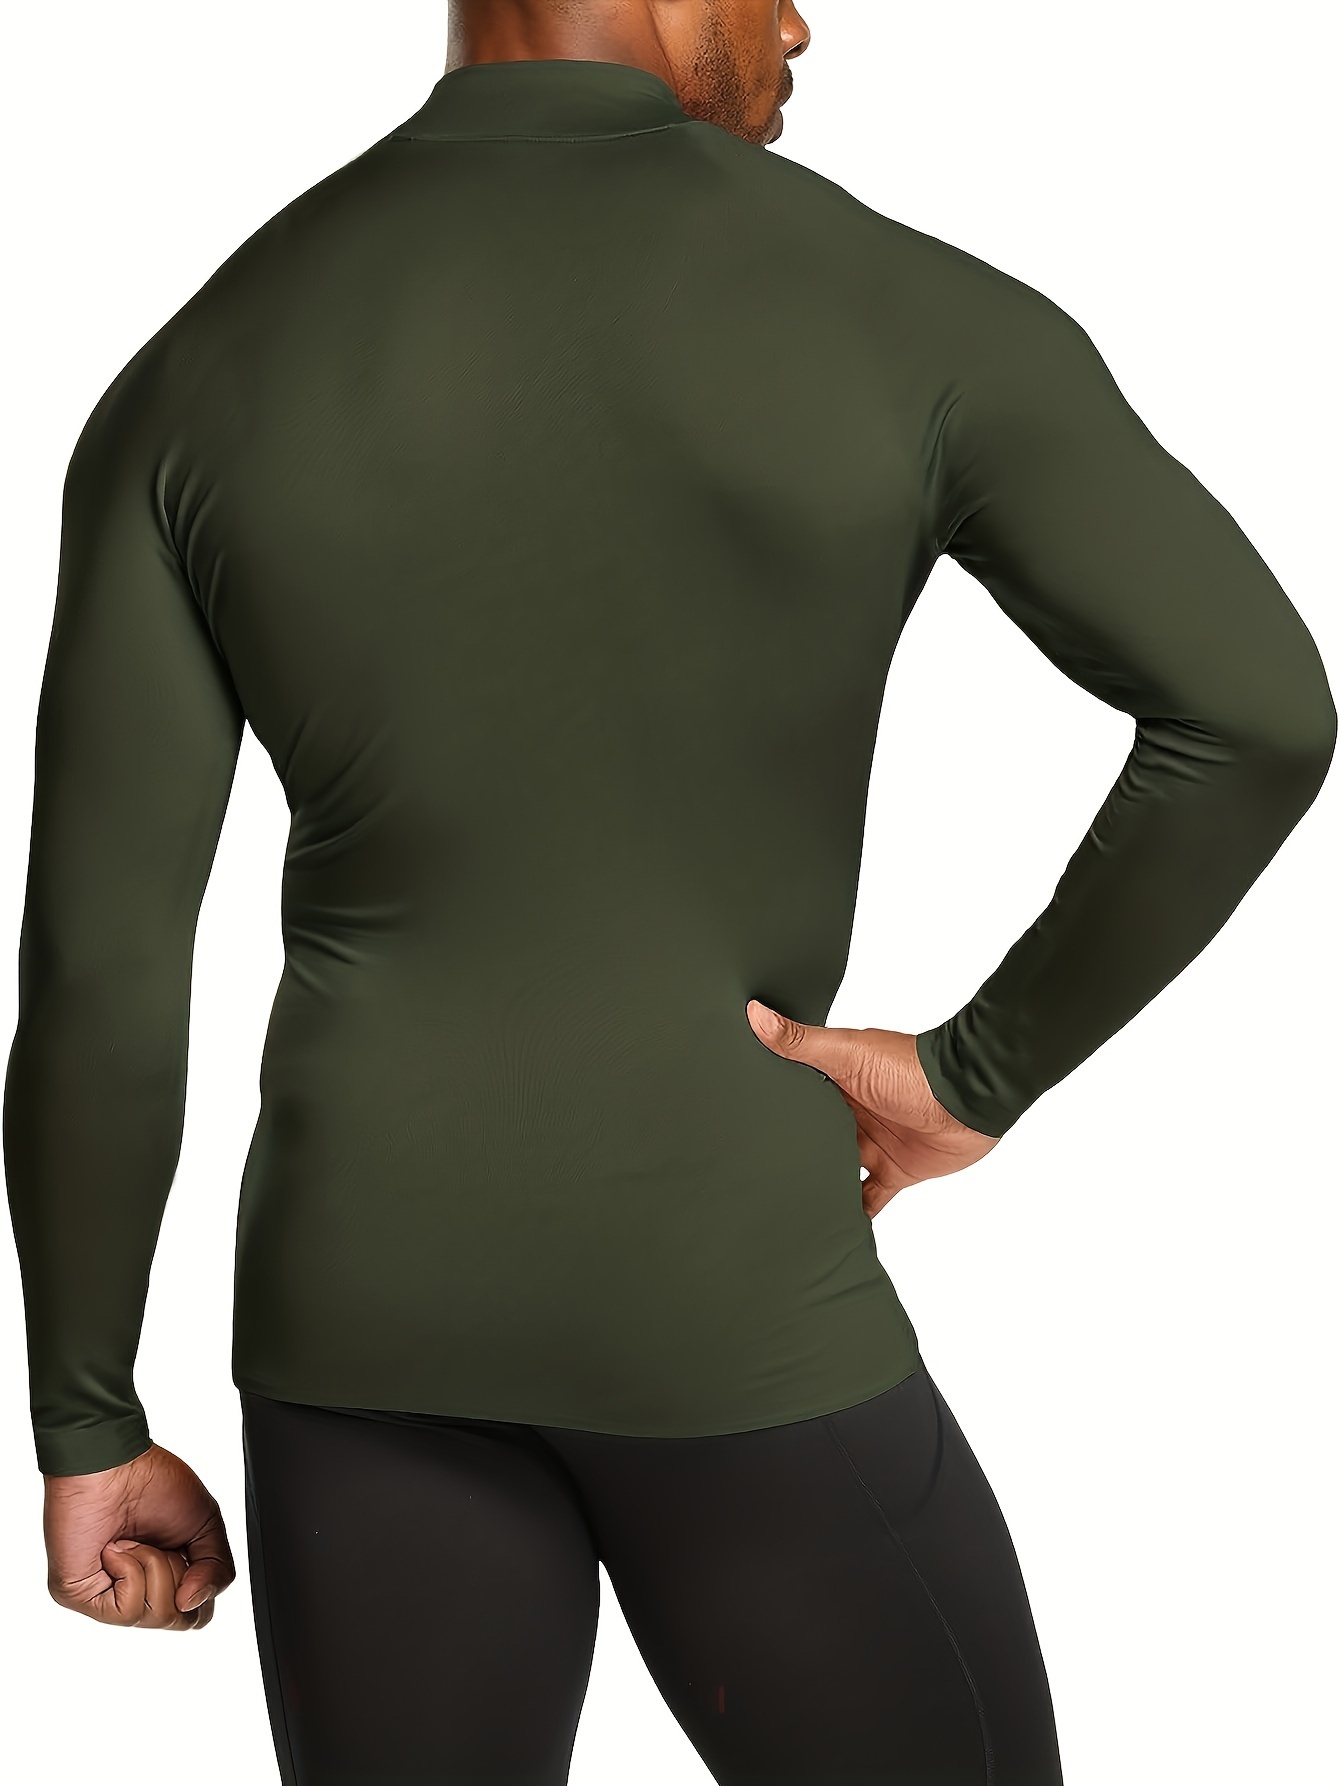 Trendy and Organic long sleeve mock neck compression shirt for All